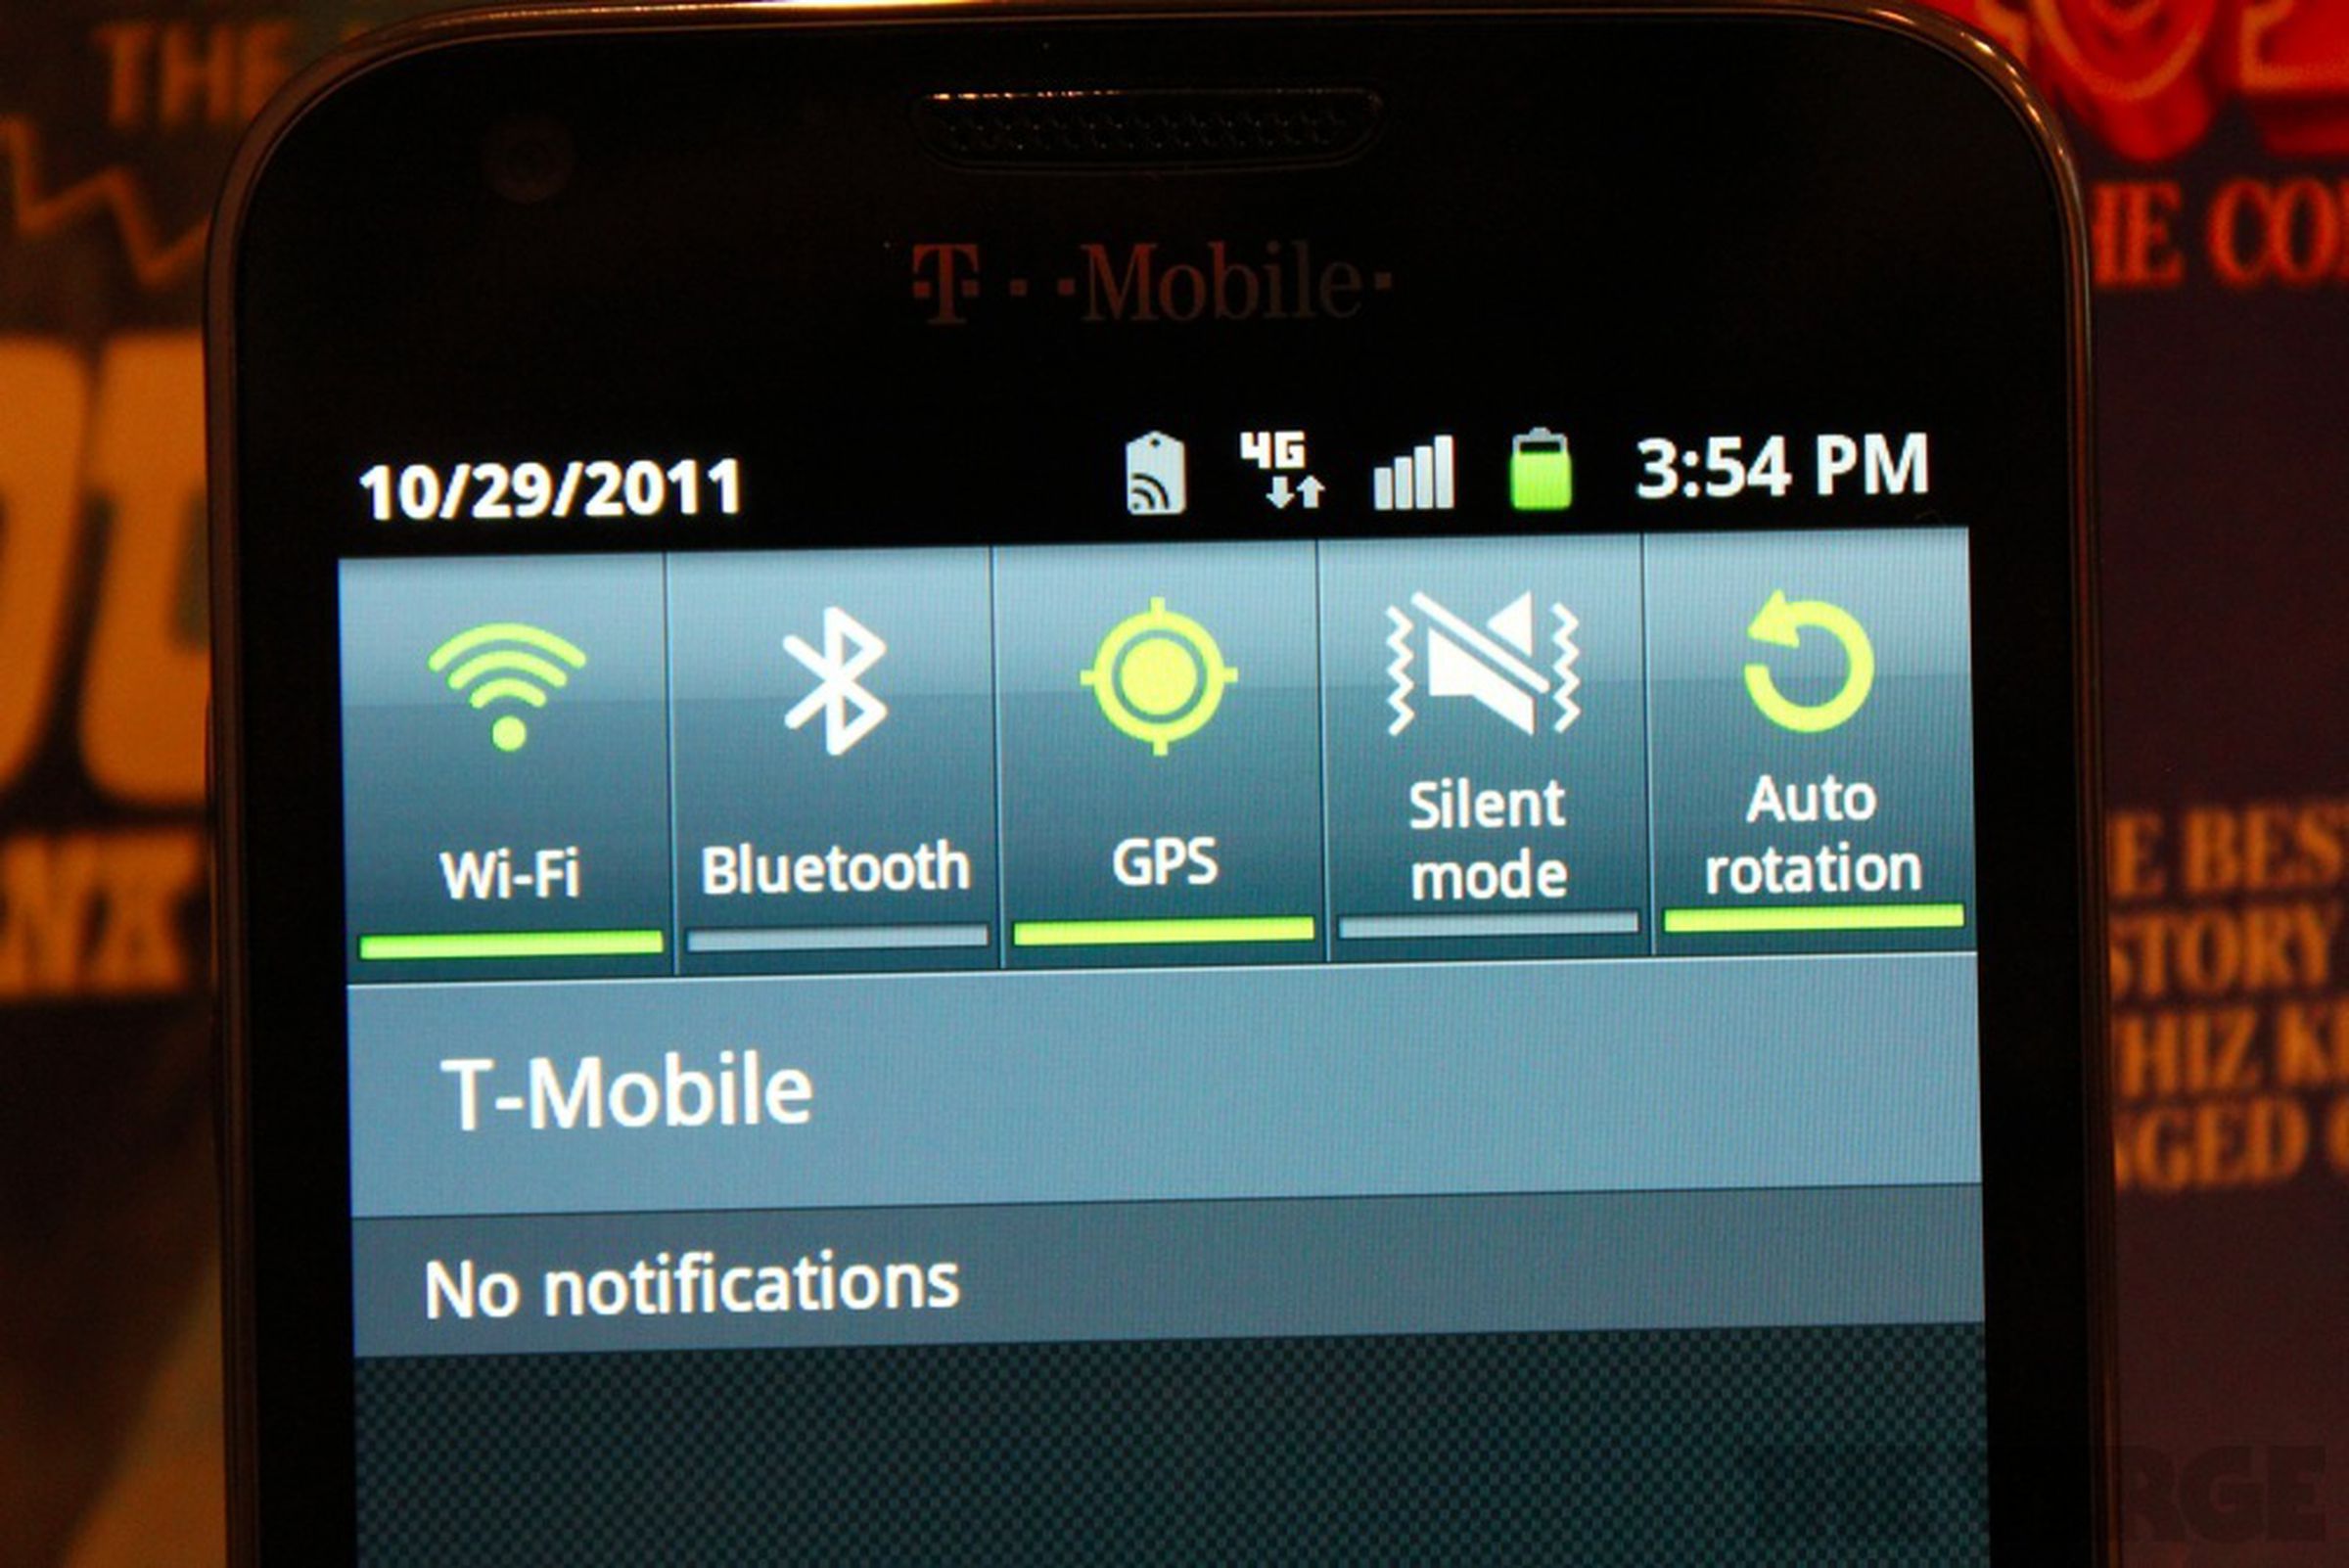 Samsung Galaxy S II for T-Mobile Review Photos